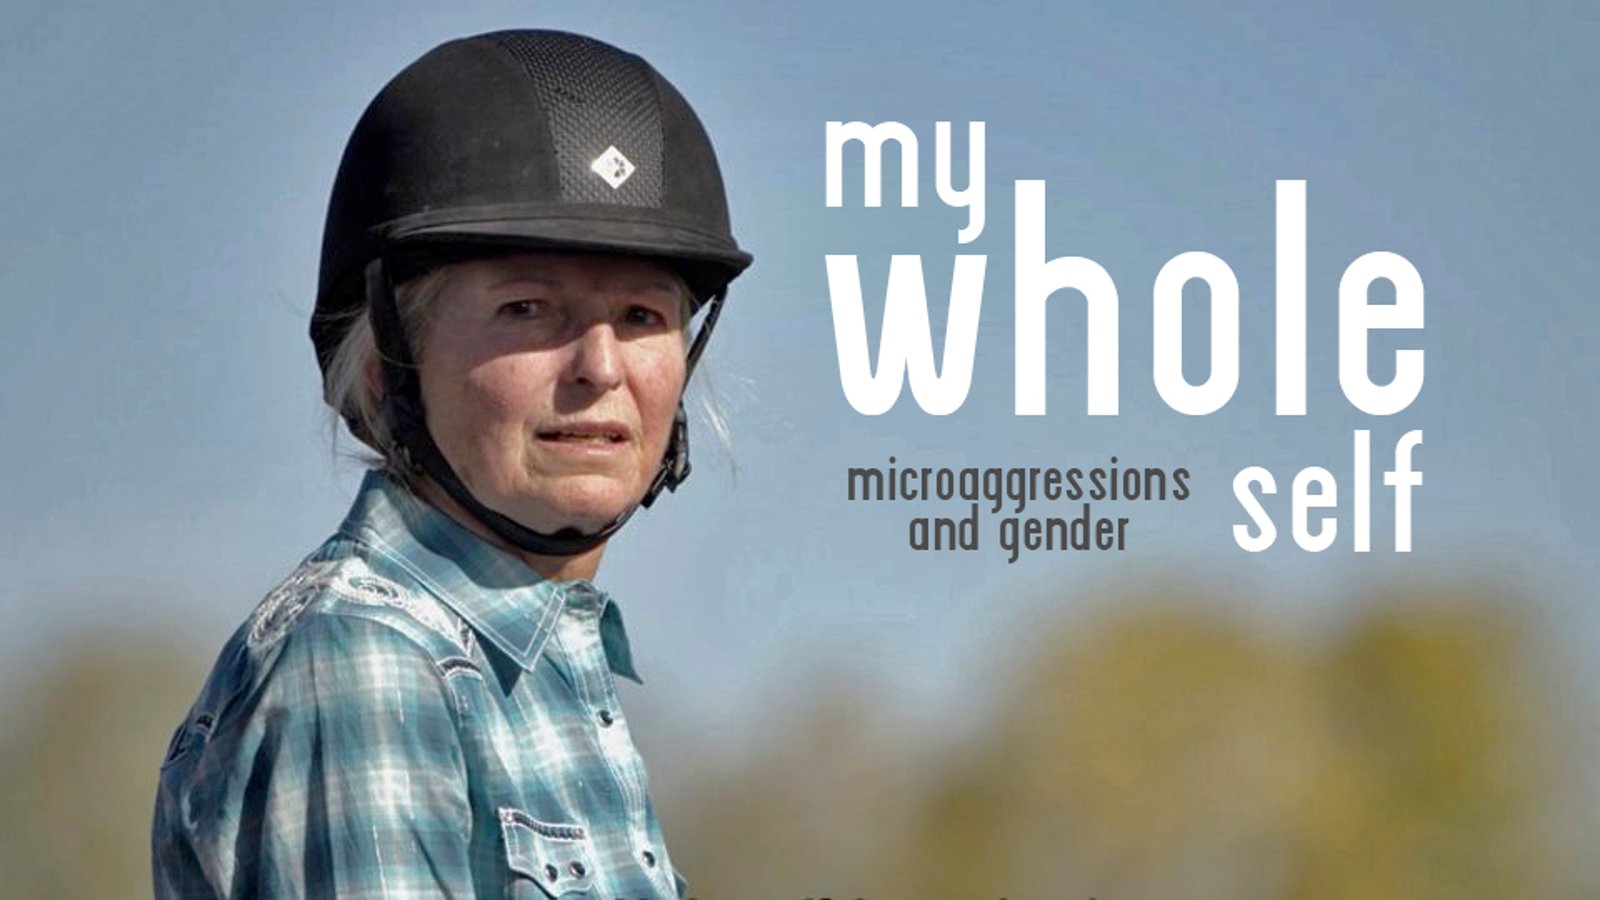 My Whole Self - Microaggressions and Gender